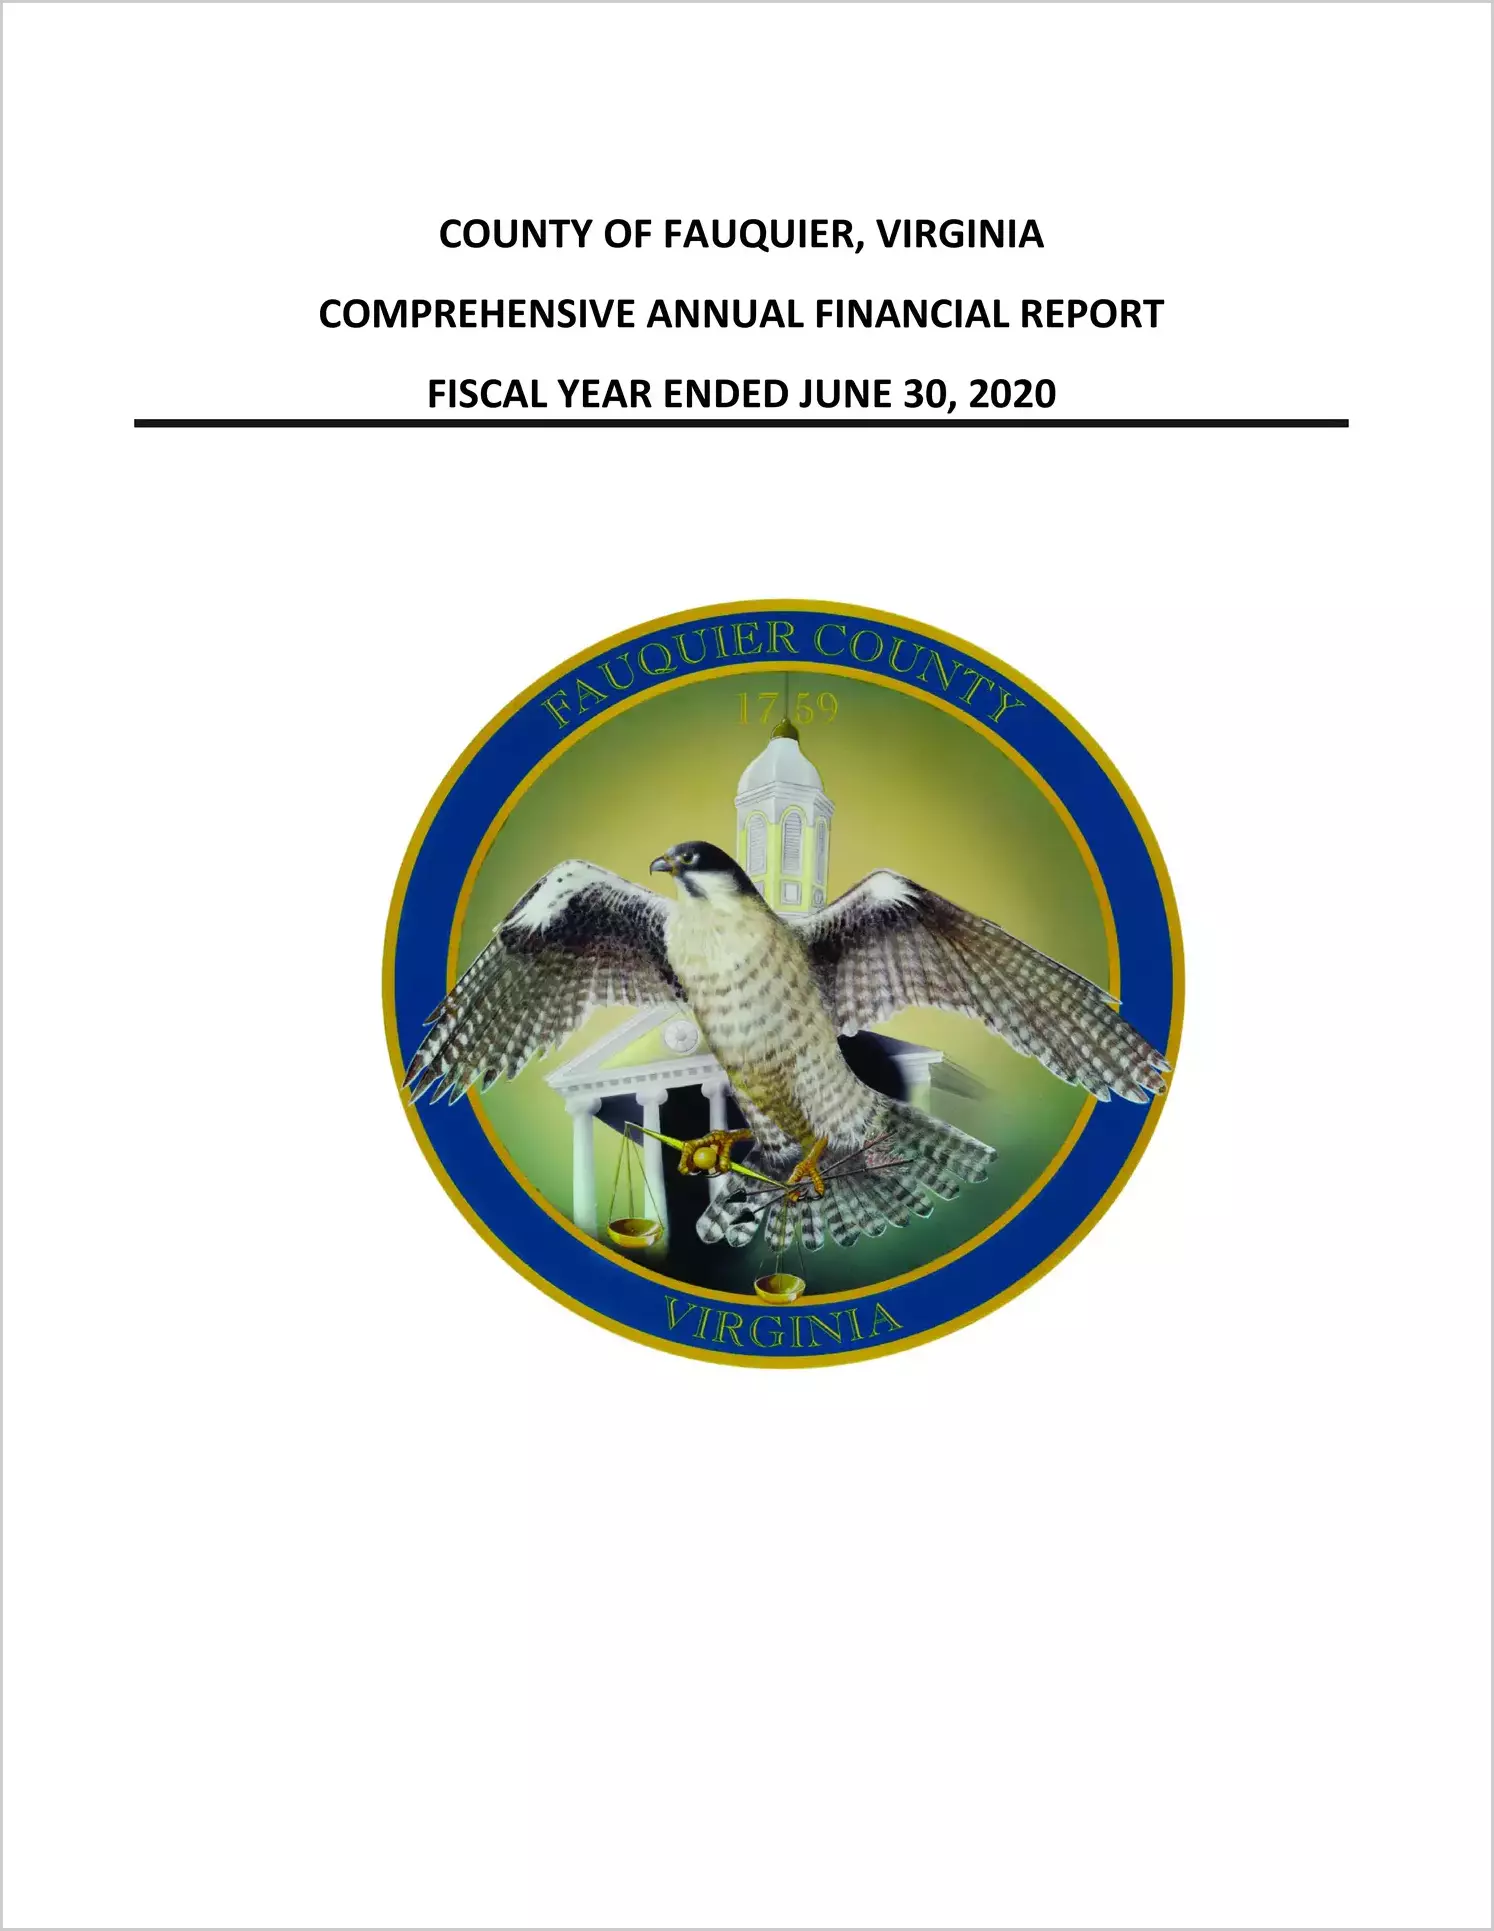 2020 Annual Financial Report for County of Fauquier